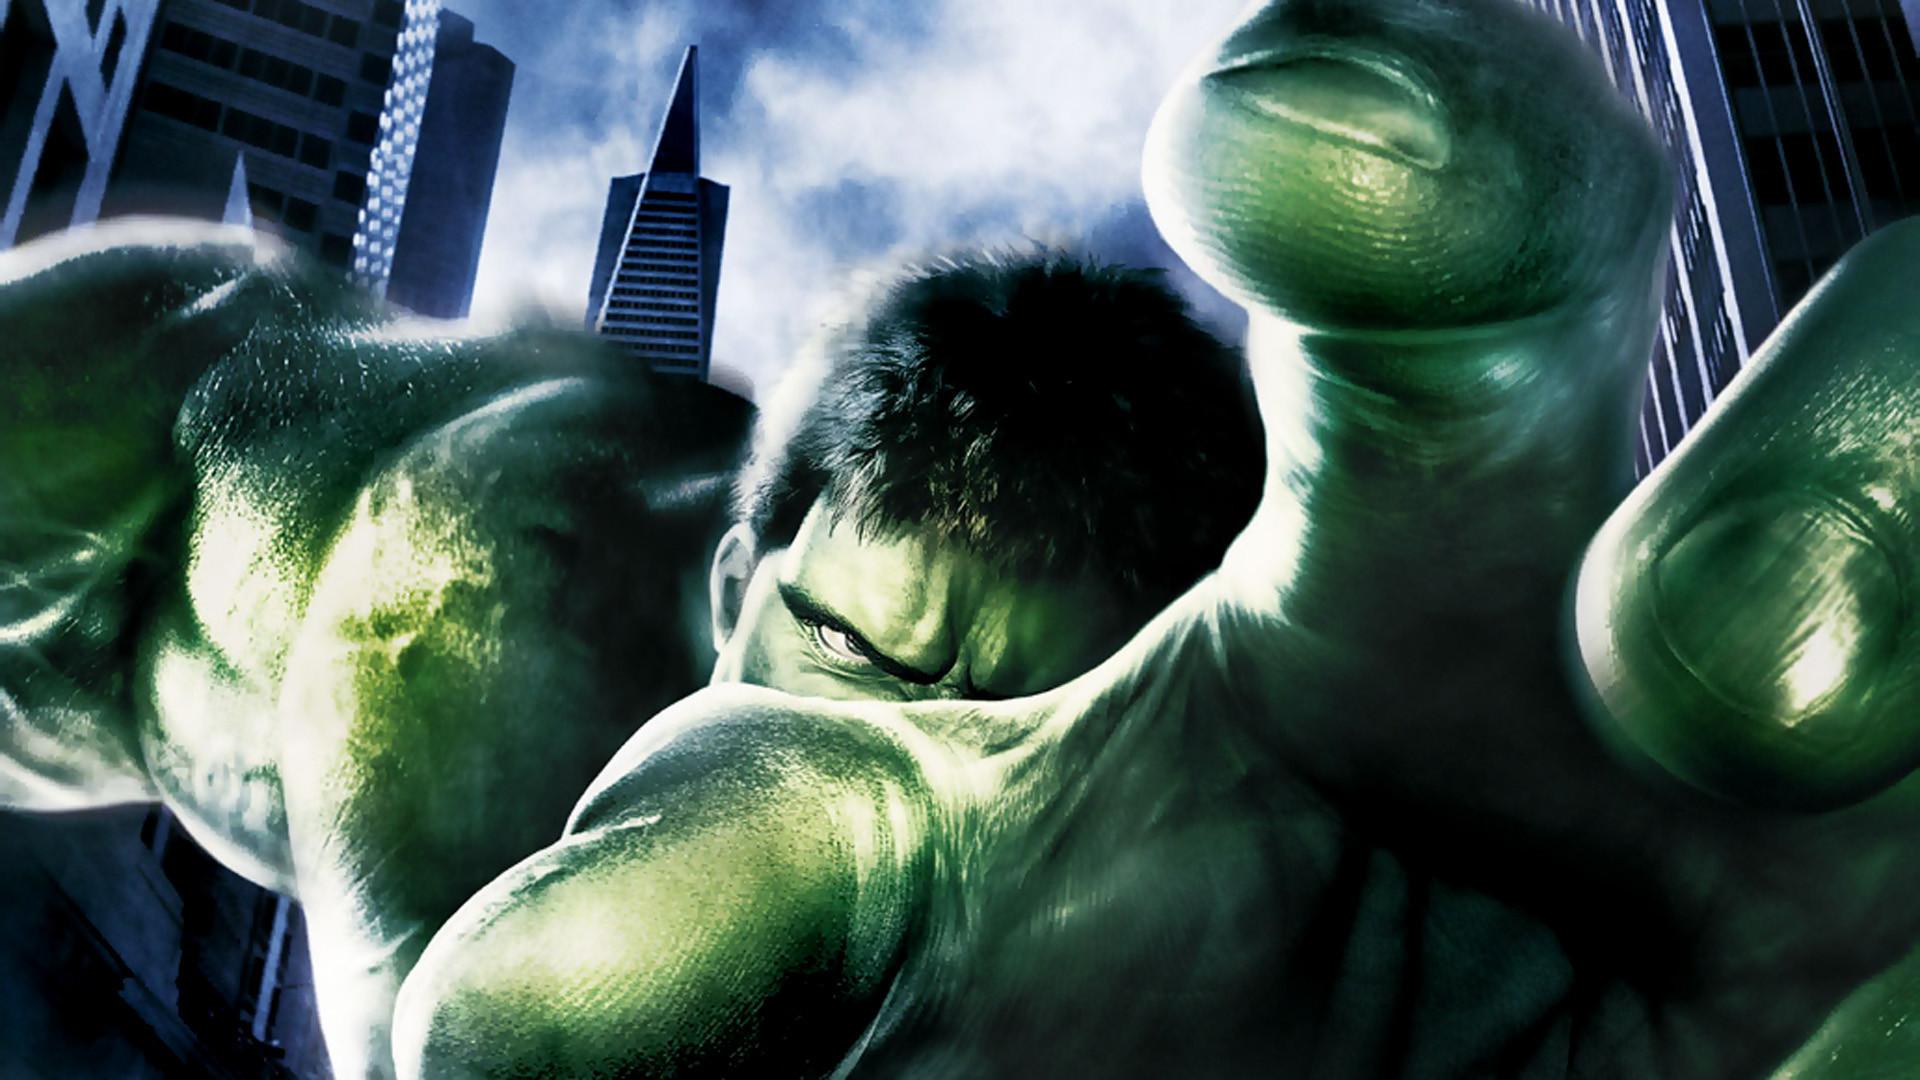 hulk 4K wallpaper for your desktop or mobile screen free and easy